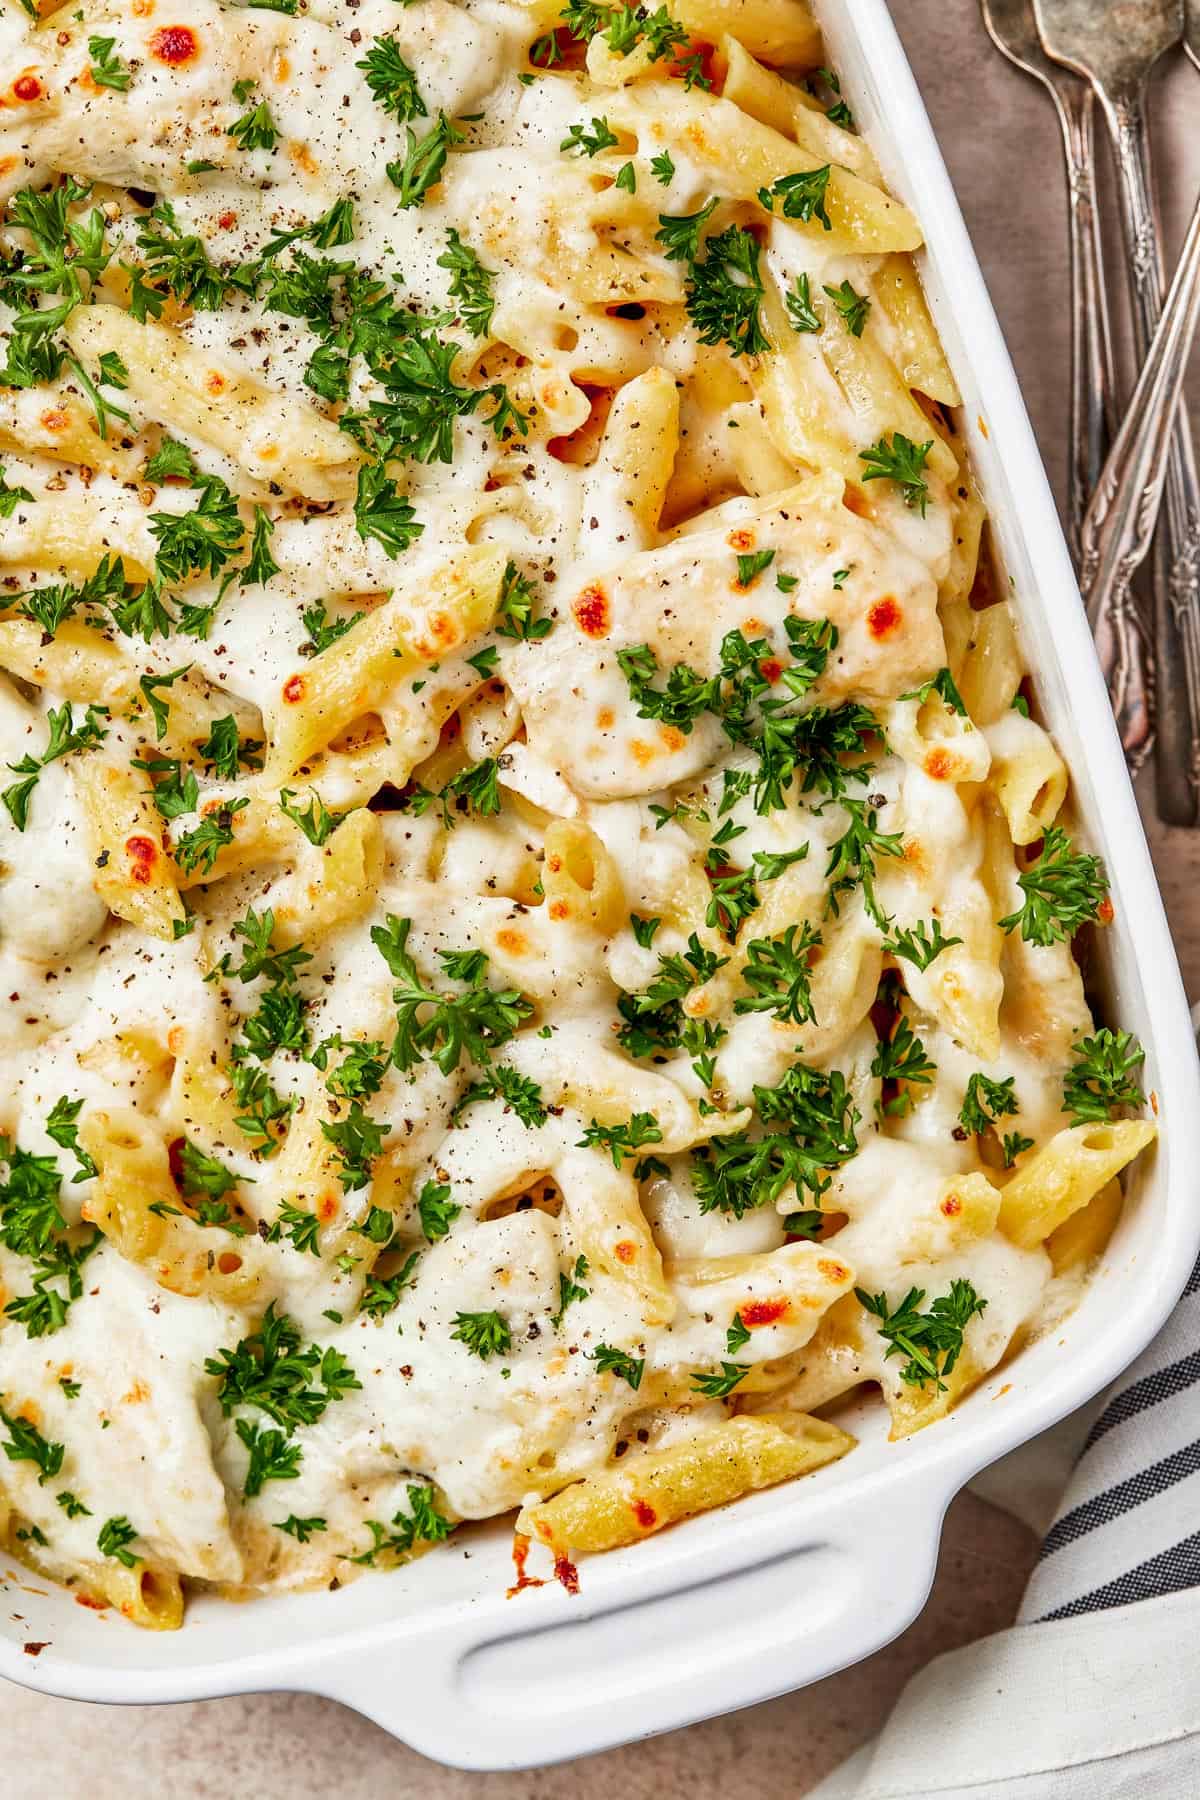 A baked chicken and pasta casserole, generously garnished with parsley.